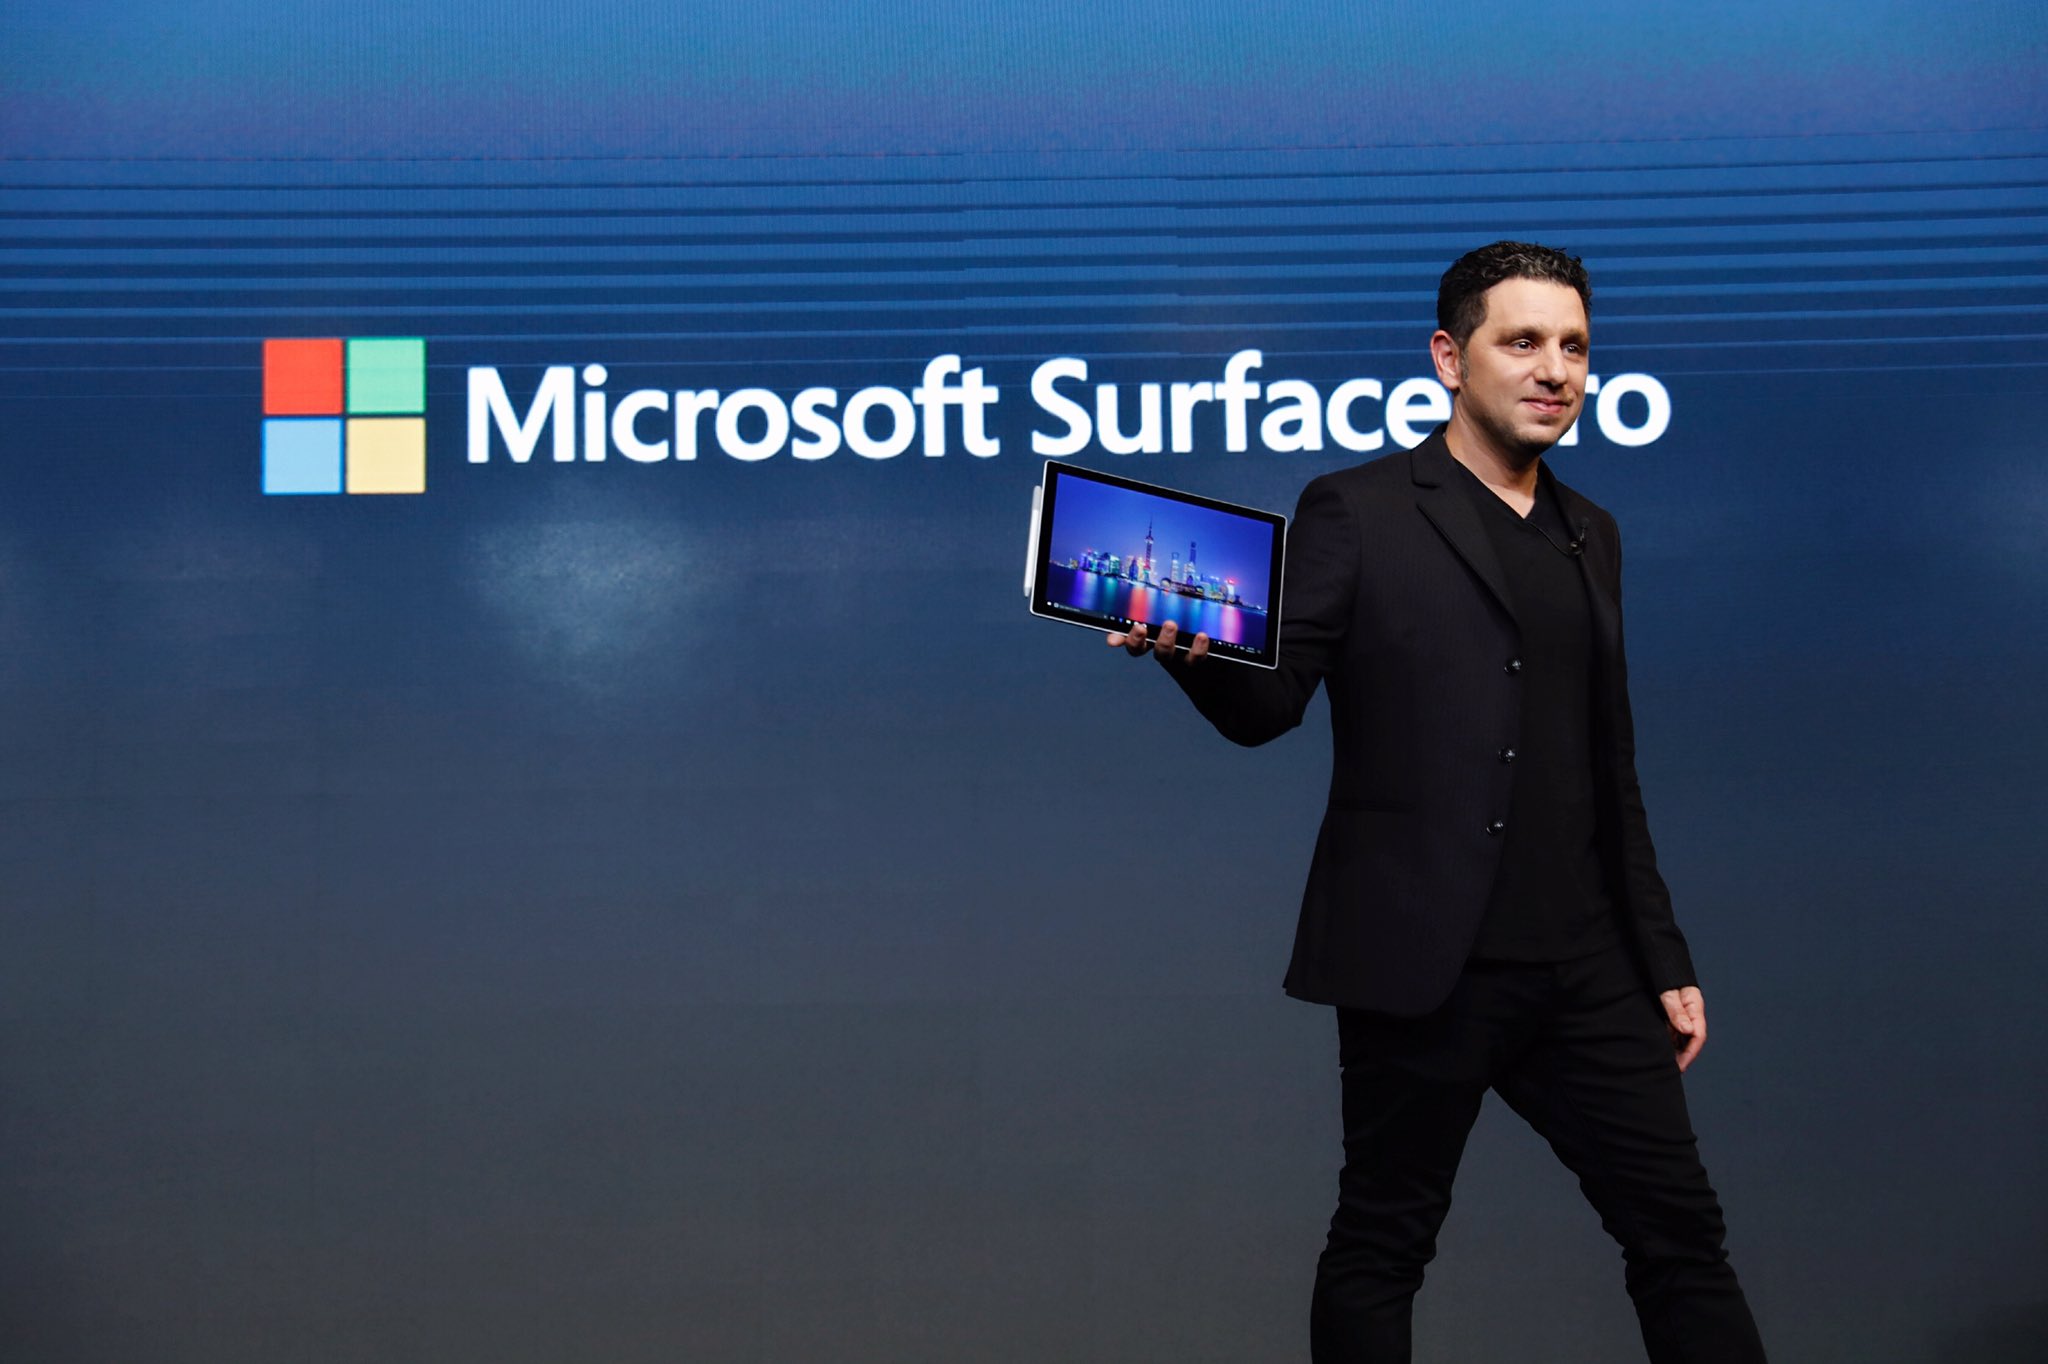 Introducing the new Microsoft Surface Pro